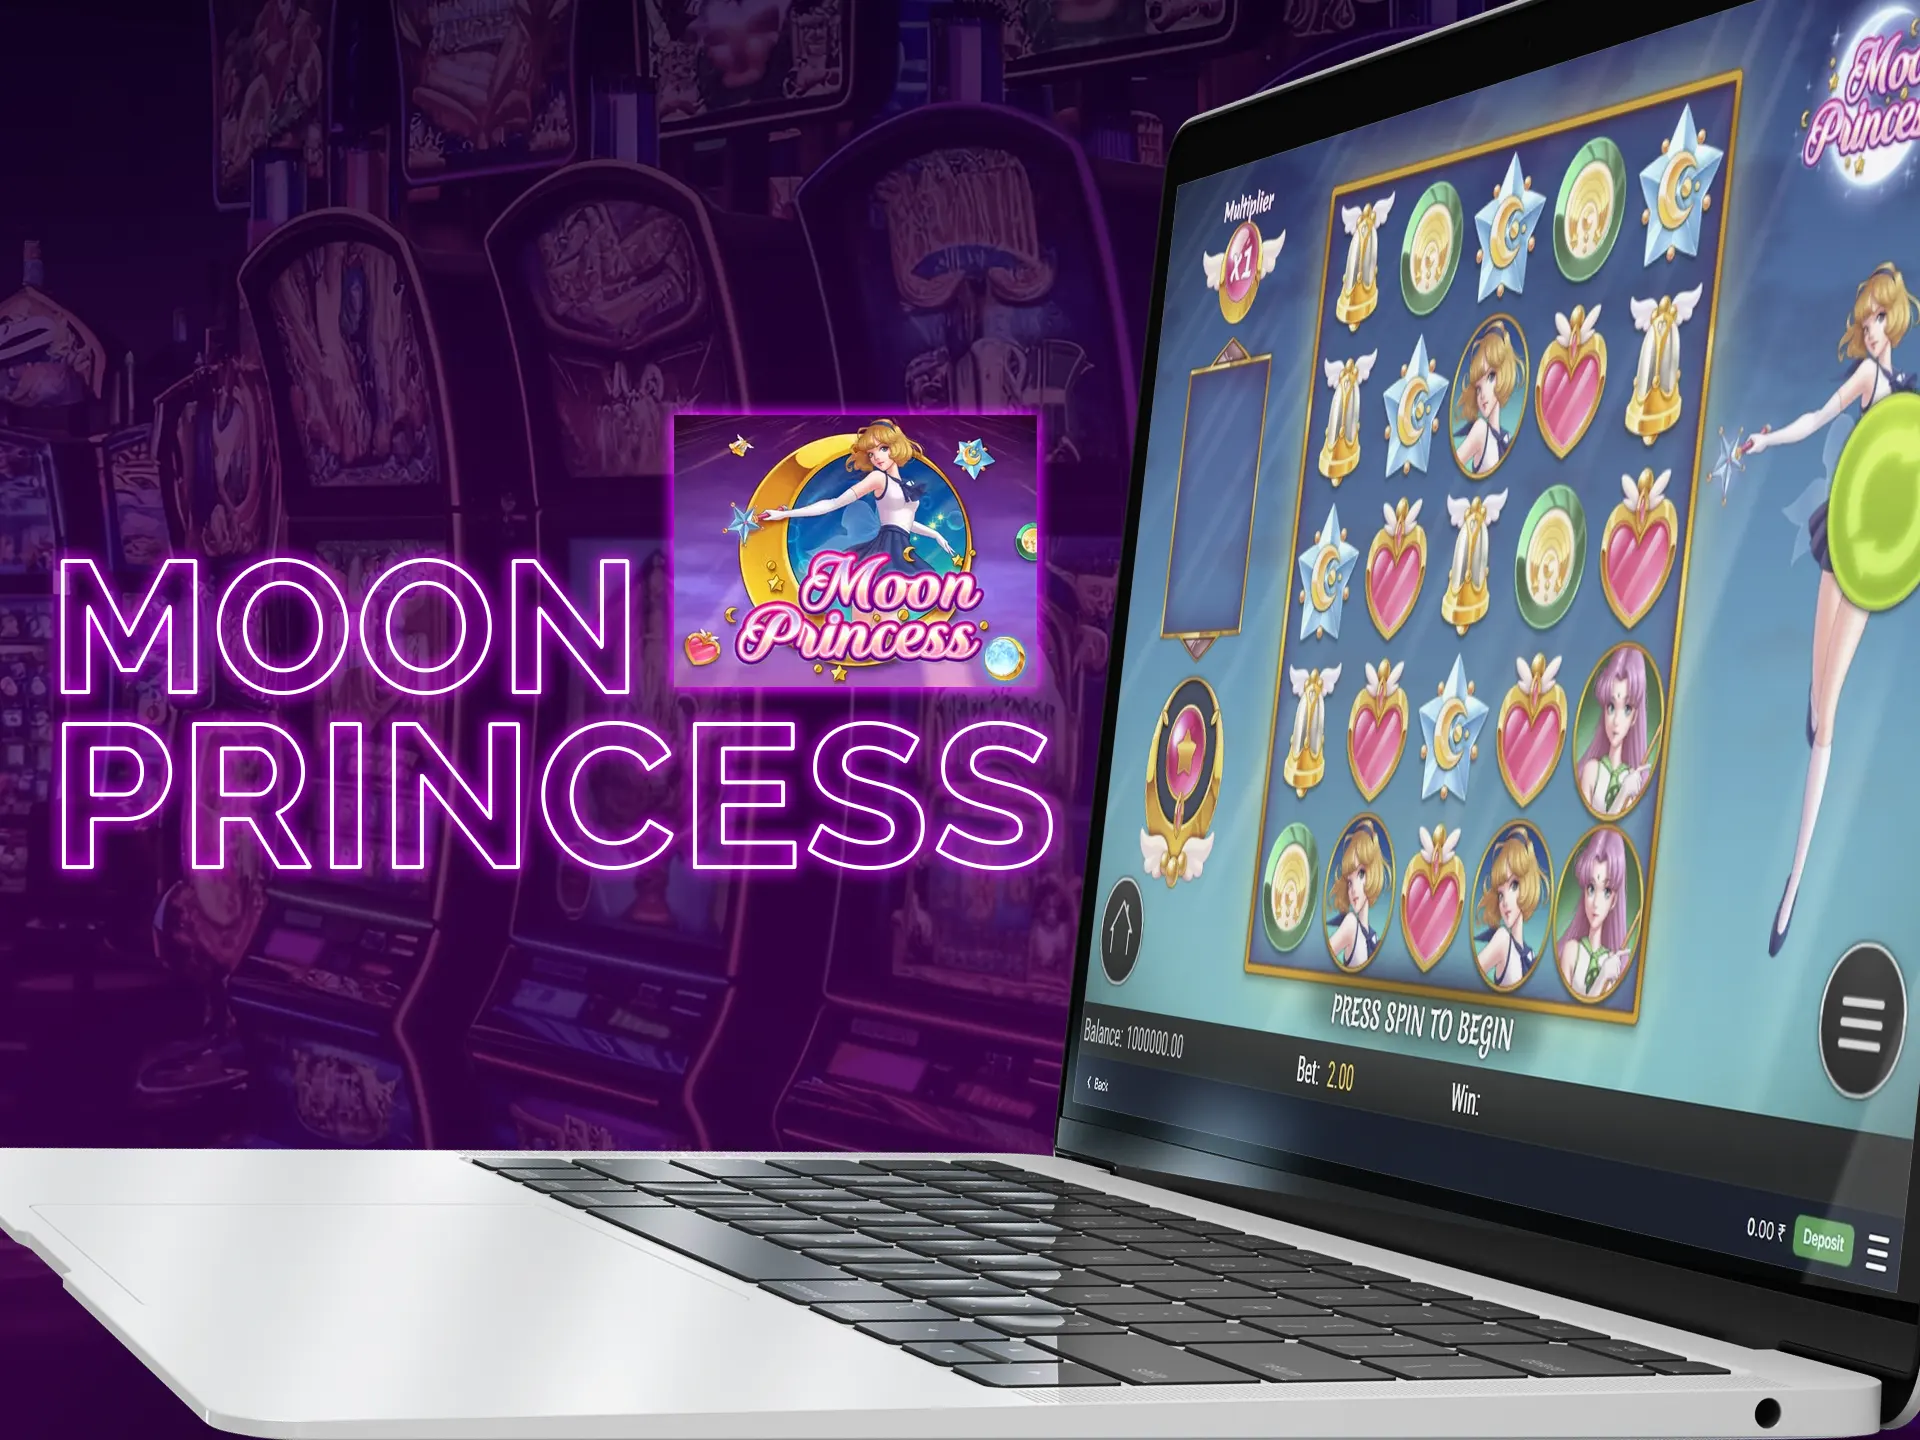 Moon Princess will provide players with an exciting gameplay experience.